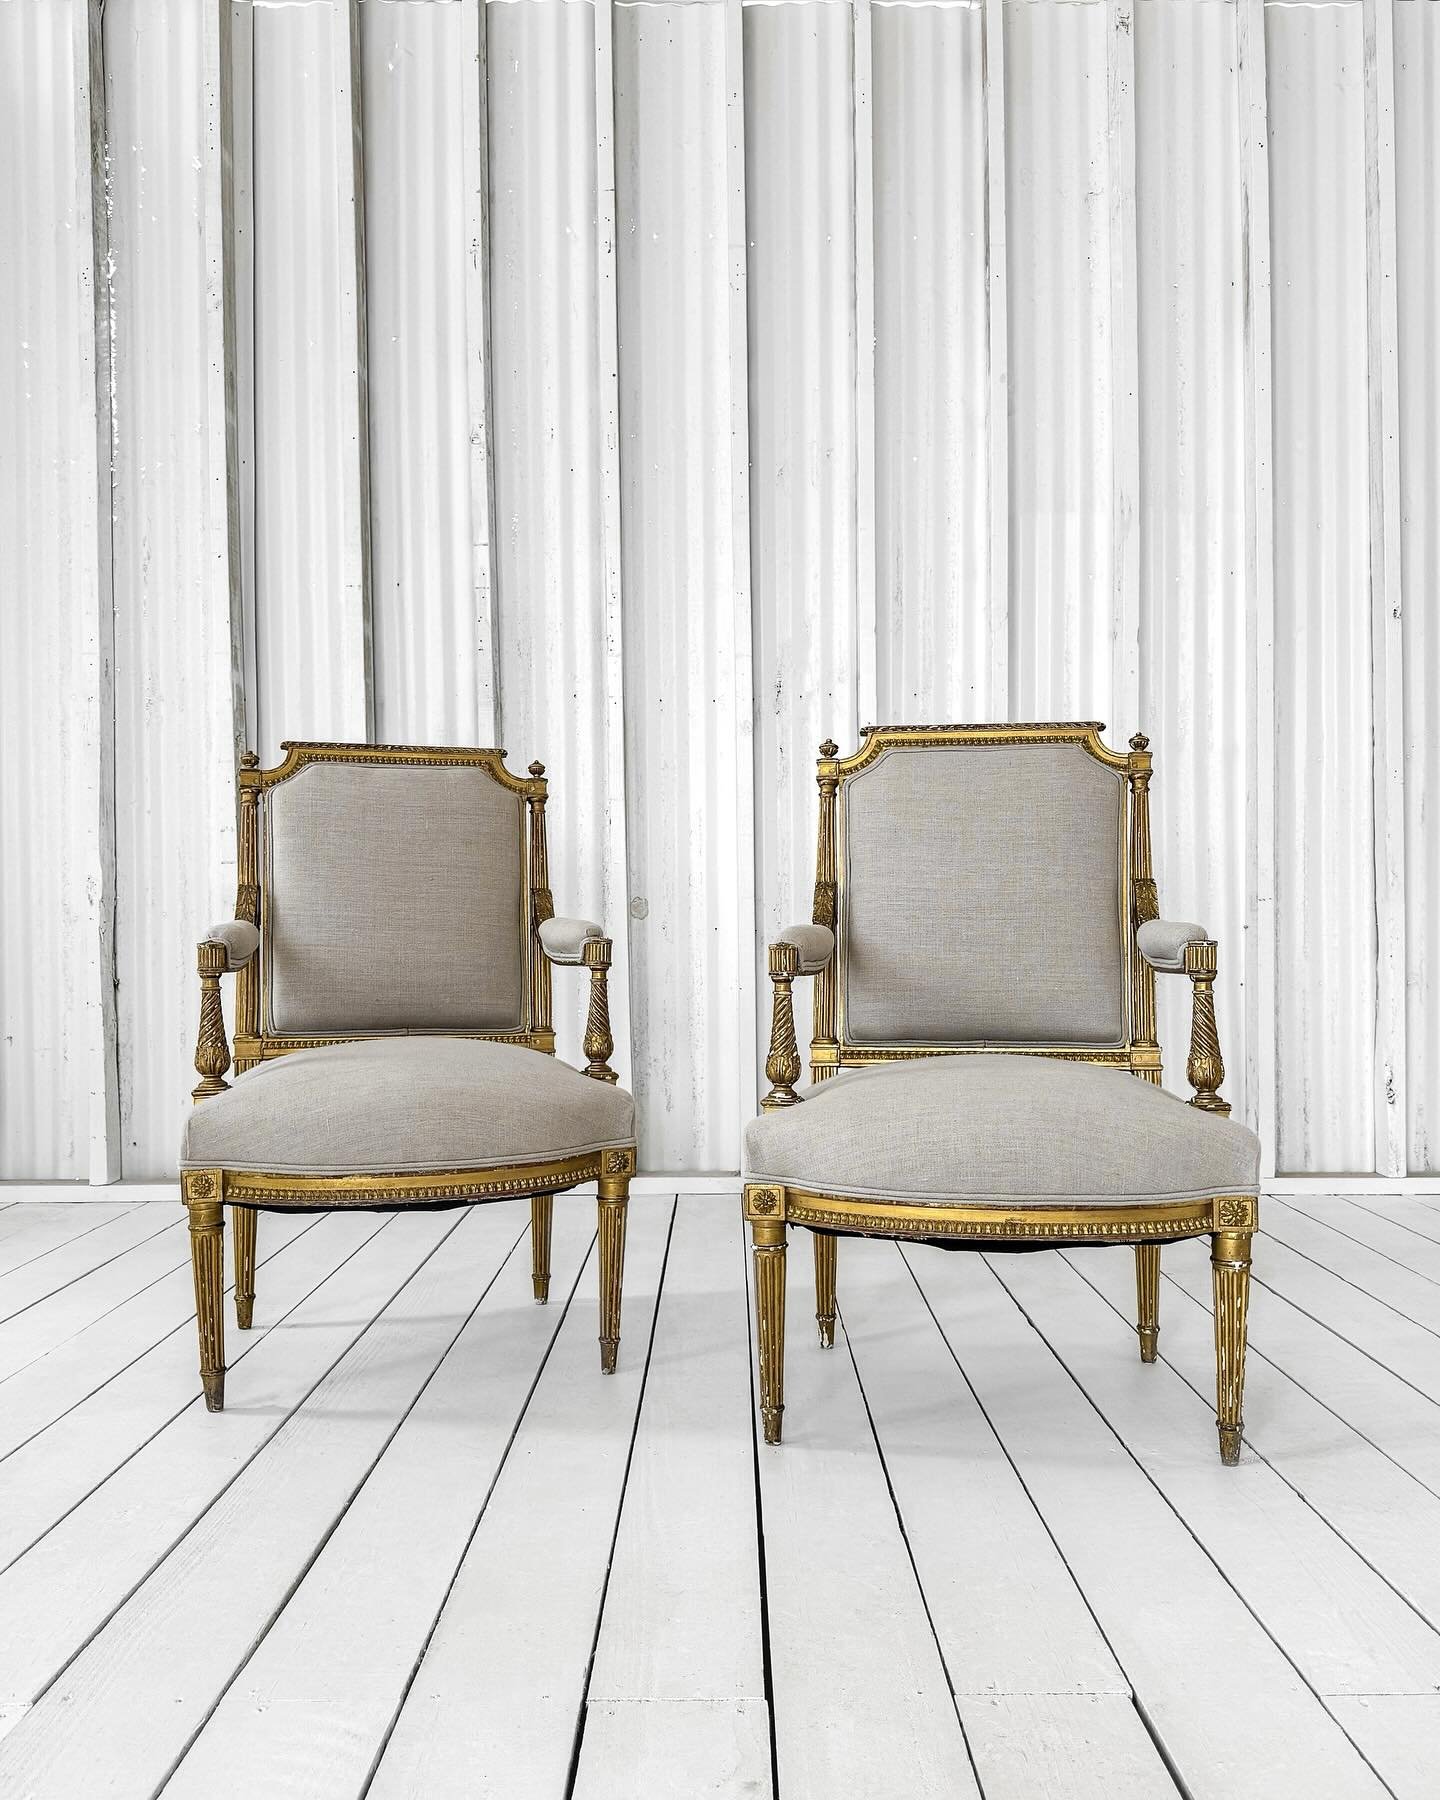 Now listed online, a pair of exquisite antique Louis XVI fauteuil armchairs. ✨ 

Handcrafted in France during the late 18th century with meticulous attention to detail, these chairs boast a charming square-shaped back and a beautifully molded frame w